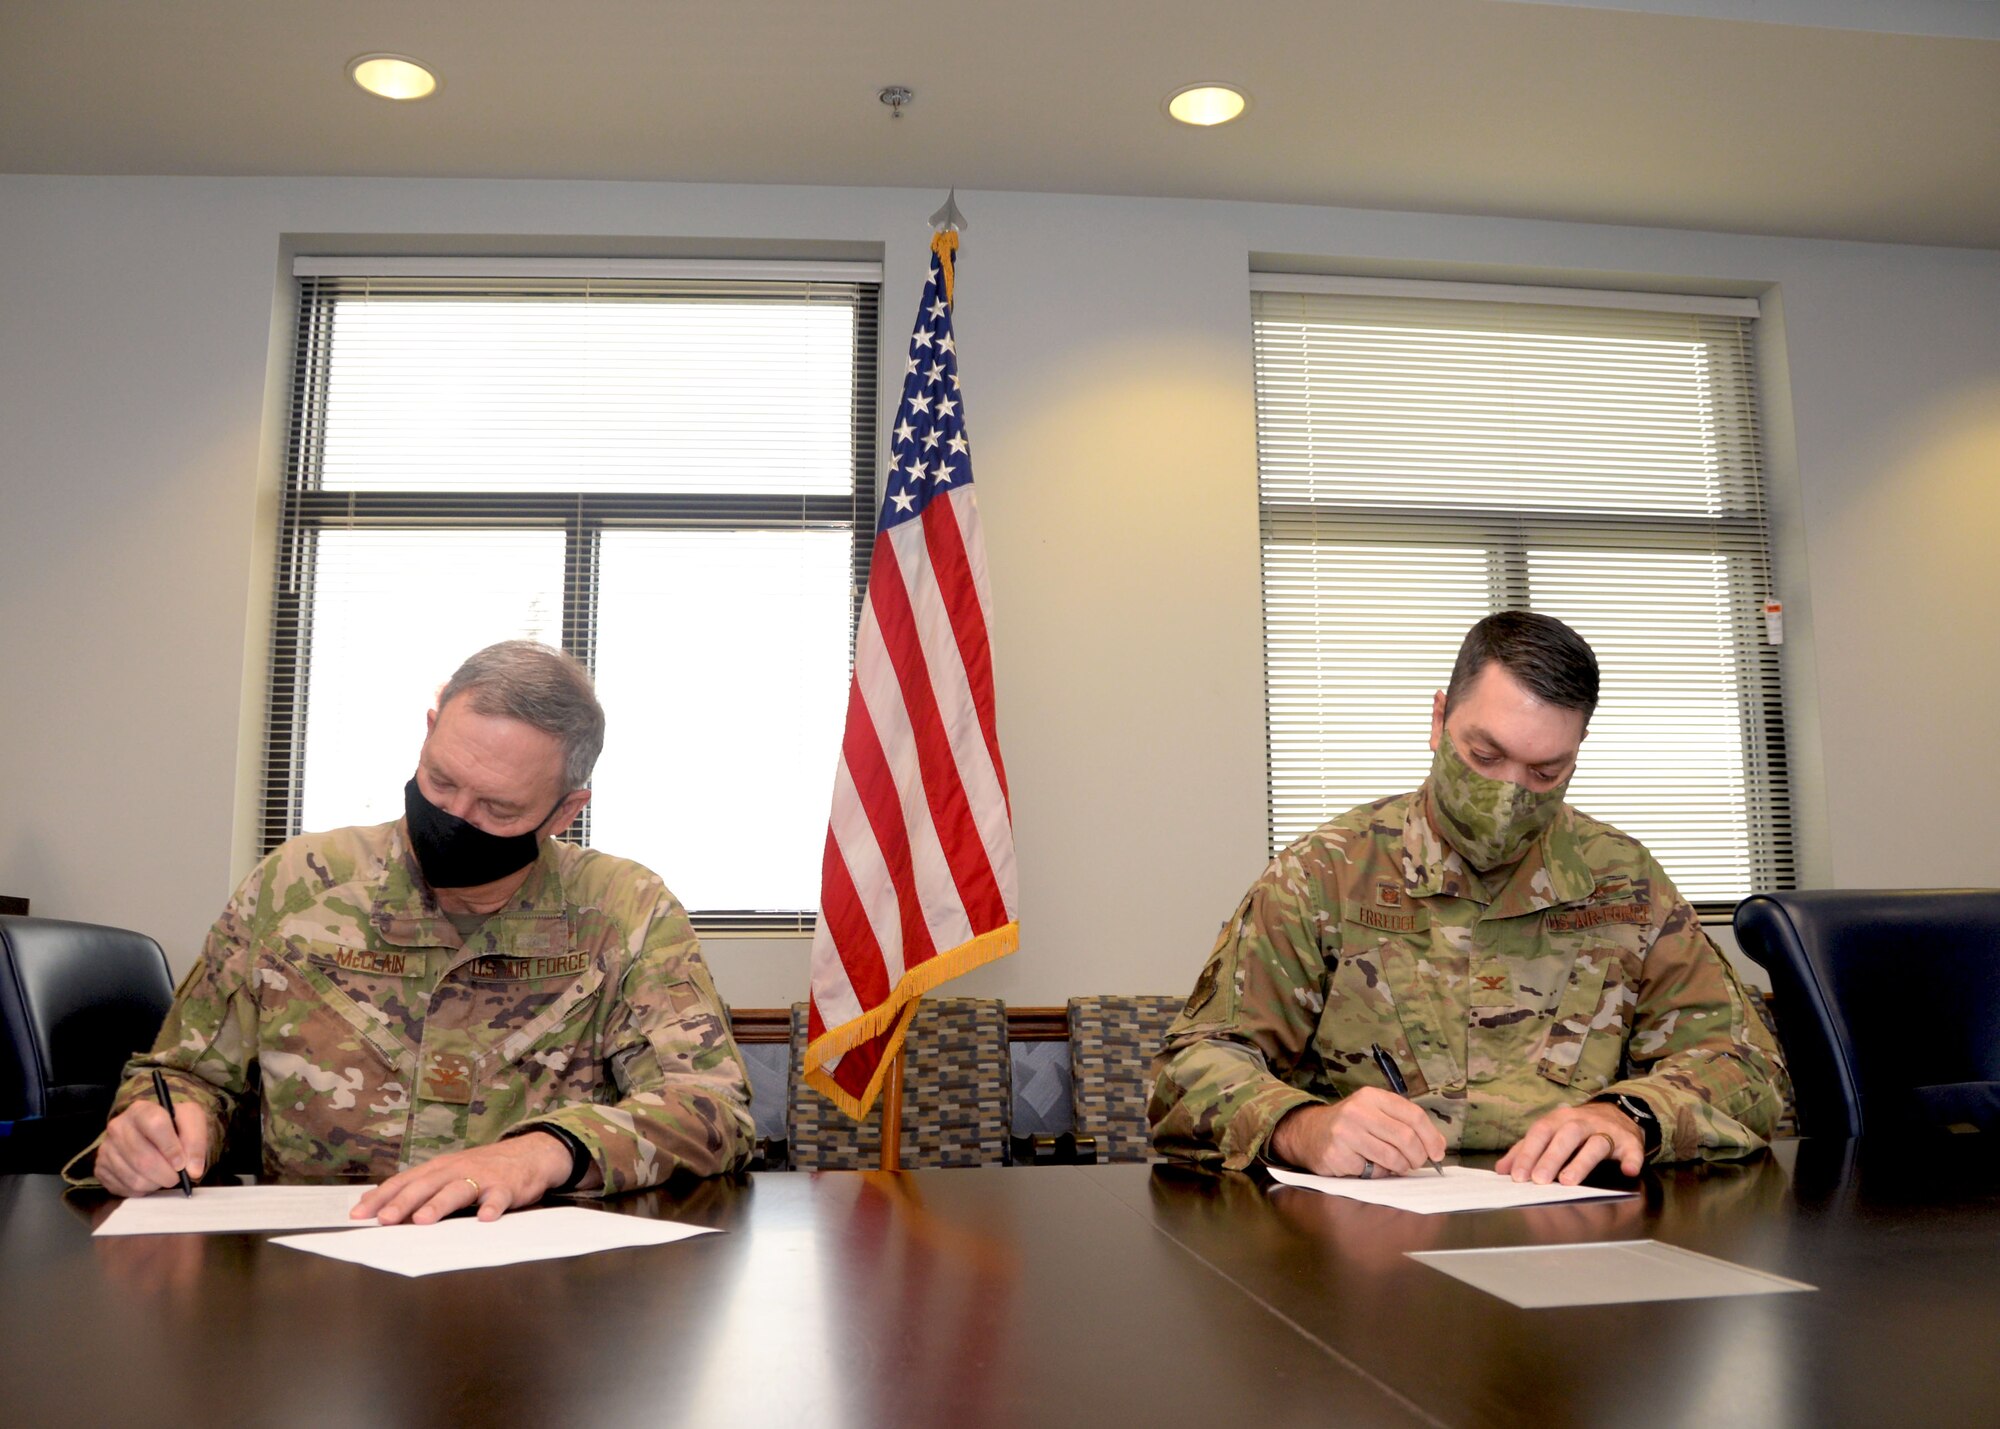 Col. Terry McClain, 433rd Airlift Wing commander, and Col. Rick Erredge, 960th Cyberspace Wing commander, sign copies of their respective versions of the 433rd AW and 960th CW Memorandum of Understanding, April 6, 2021, at Joint Base San Antonio-Lackland, Texas. (U.S. Air Force photo by Samantha Mathison)